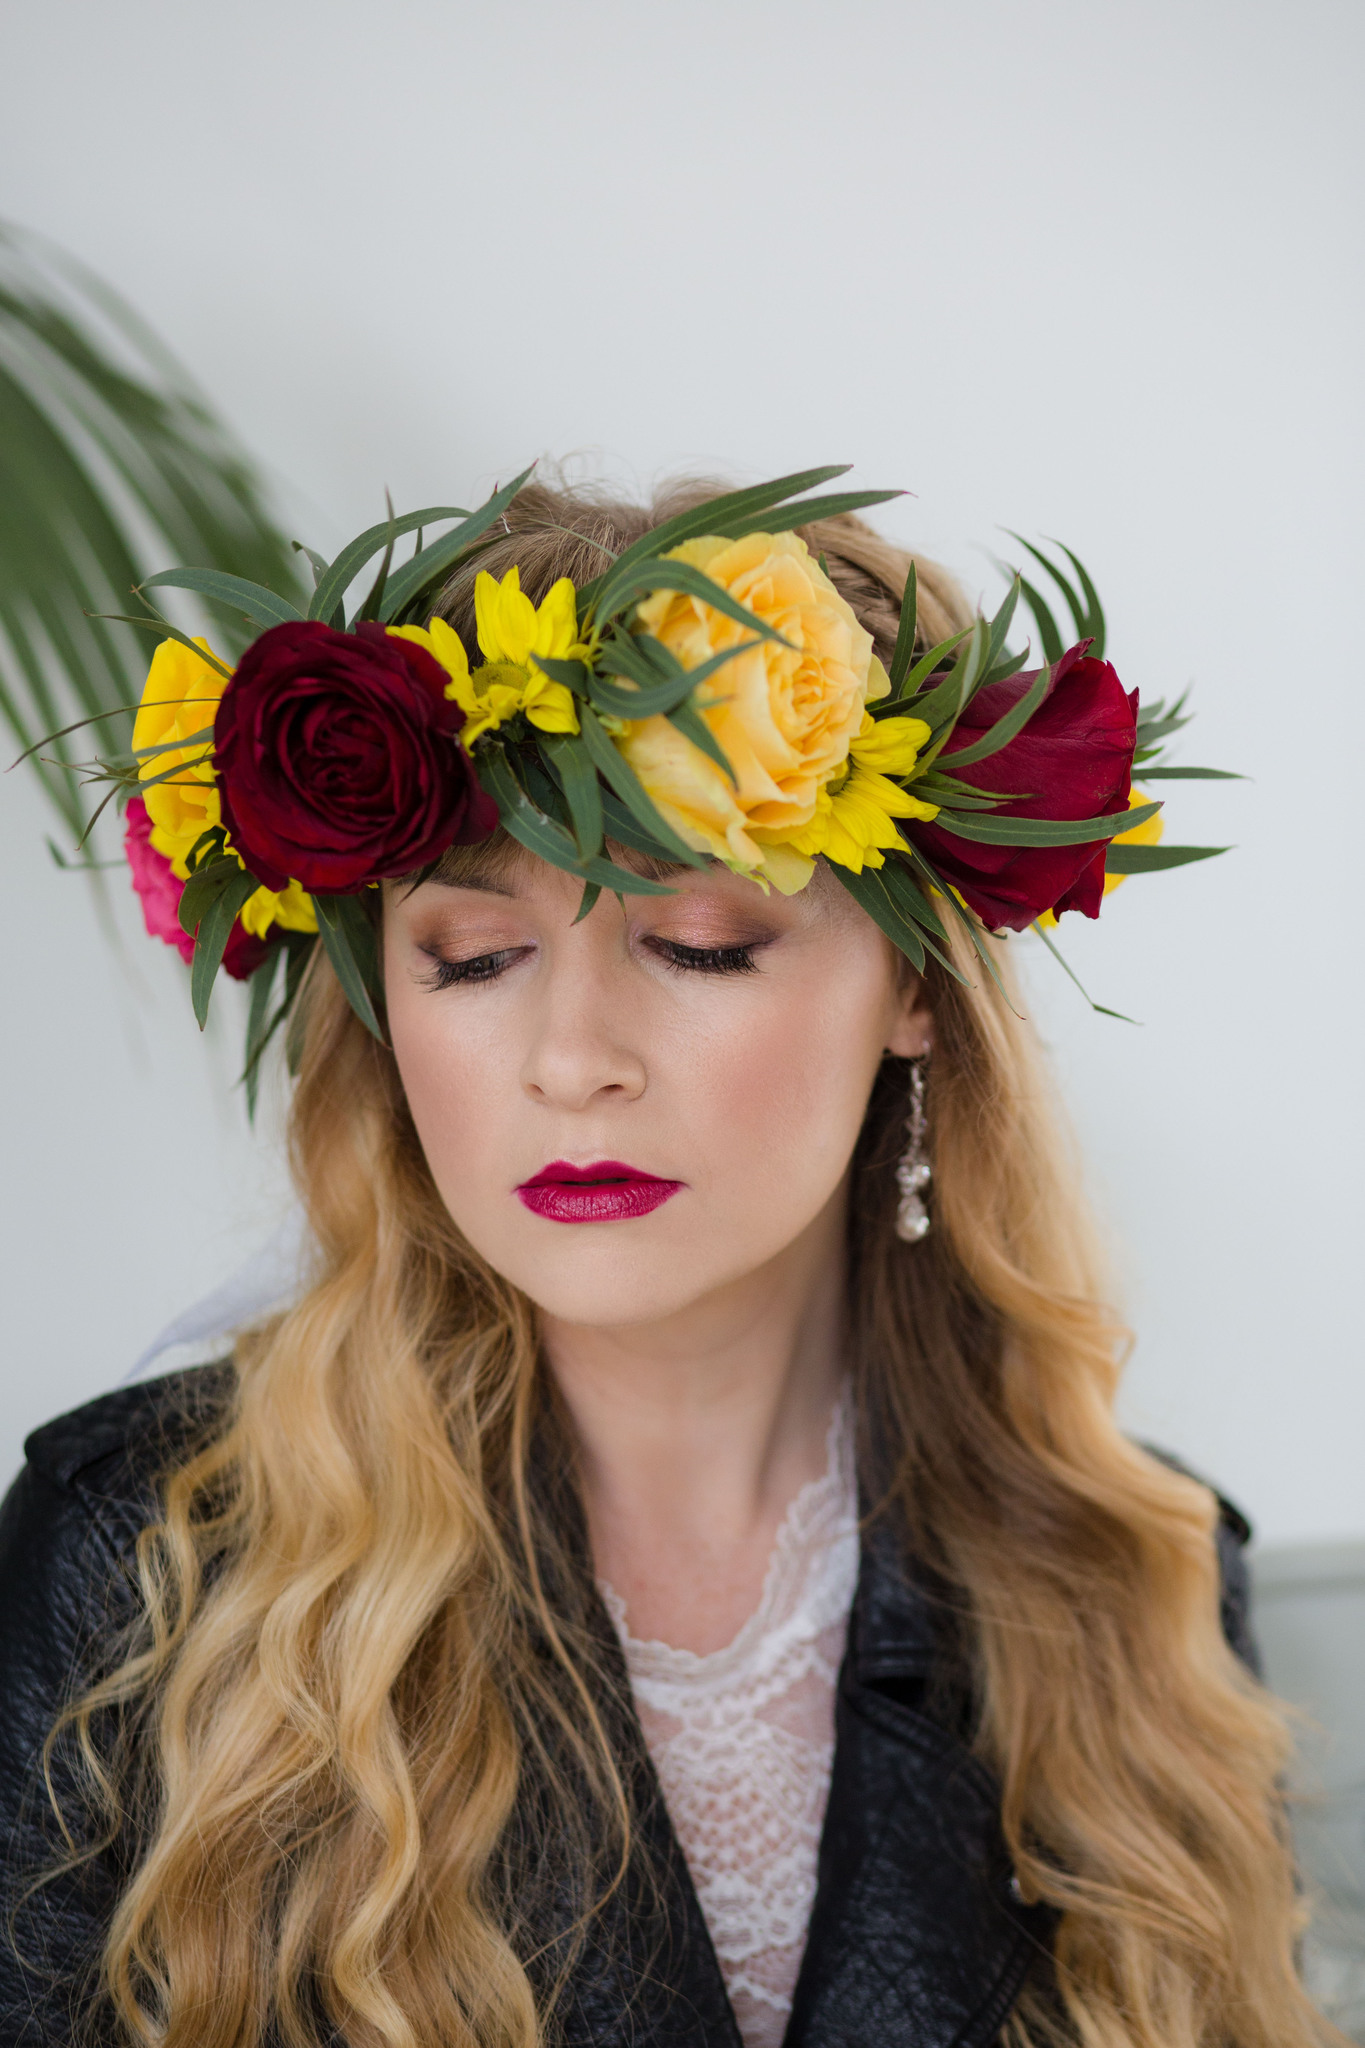 Boho Bride wearing flower crown and leather jacket and bridal jumpsuit